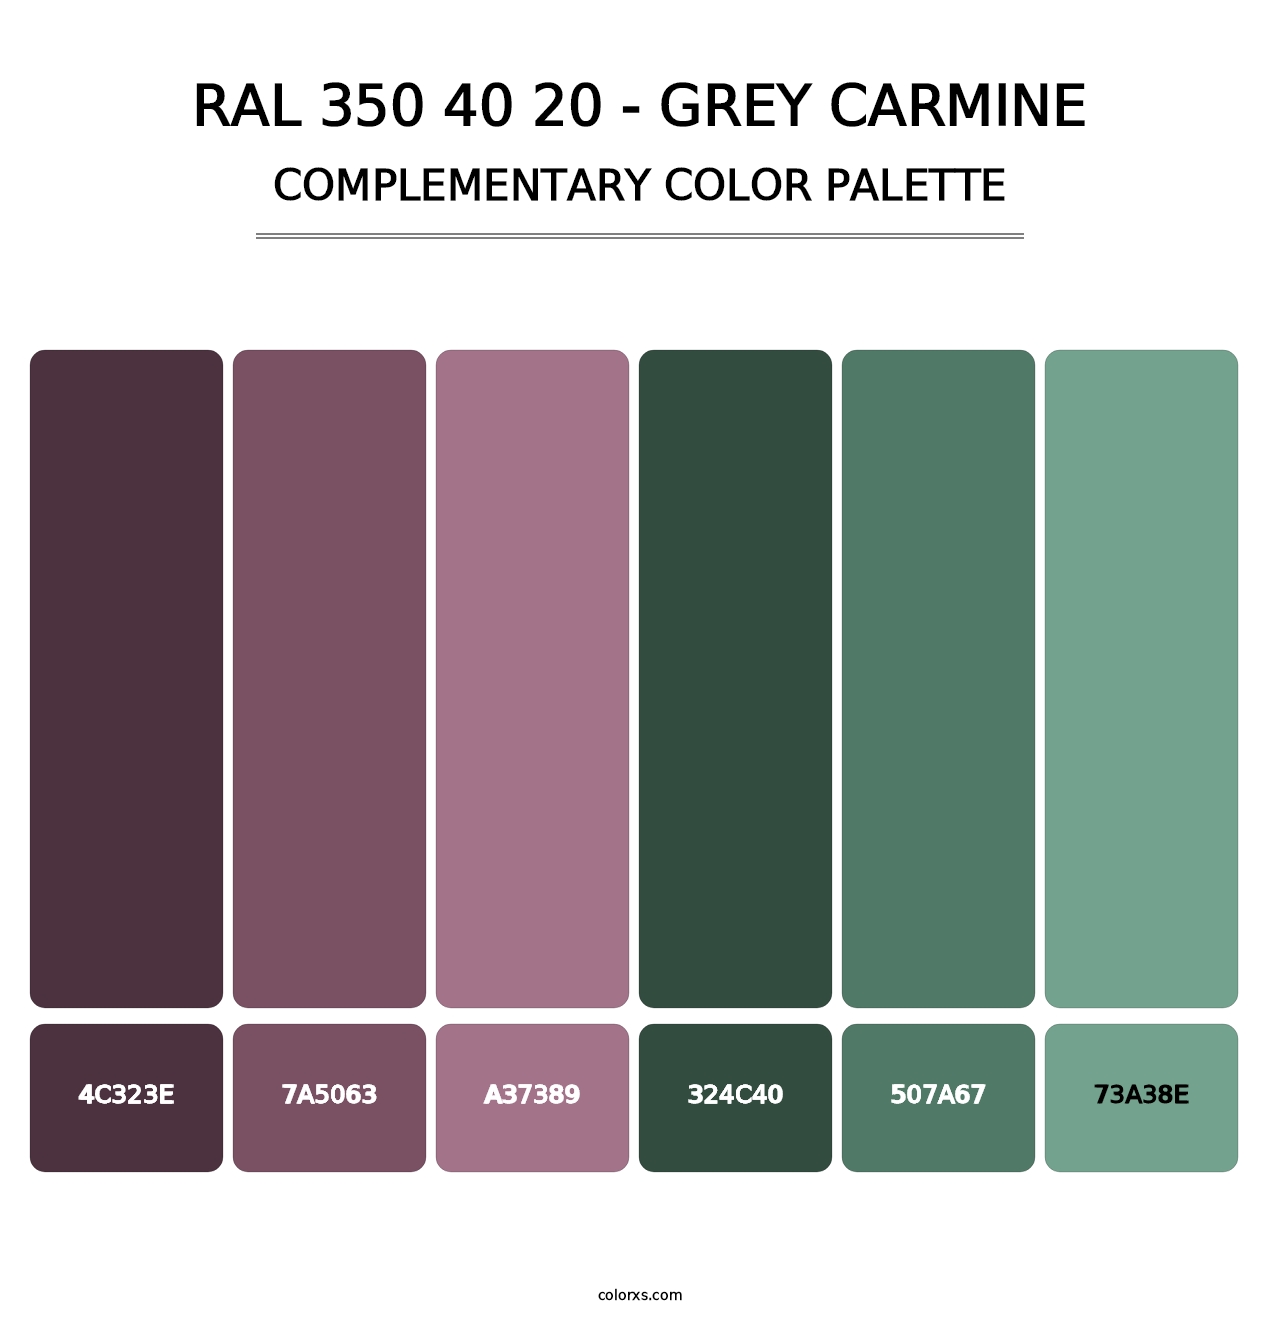 RAL 350 40 20 - Grey Carmine - Complementary Color Palette